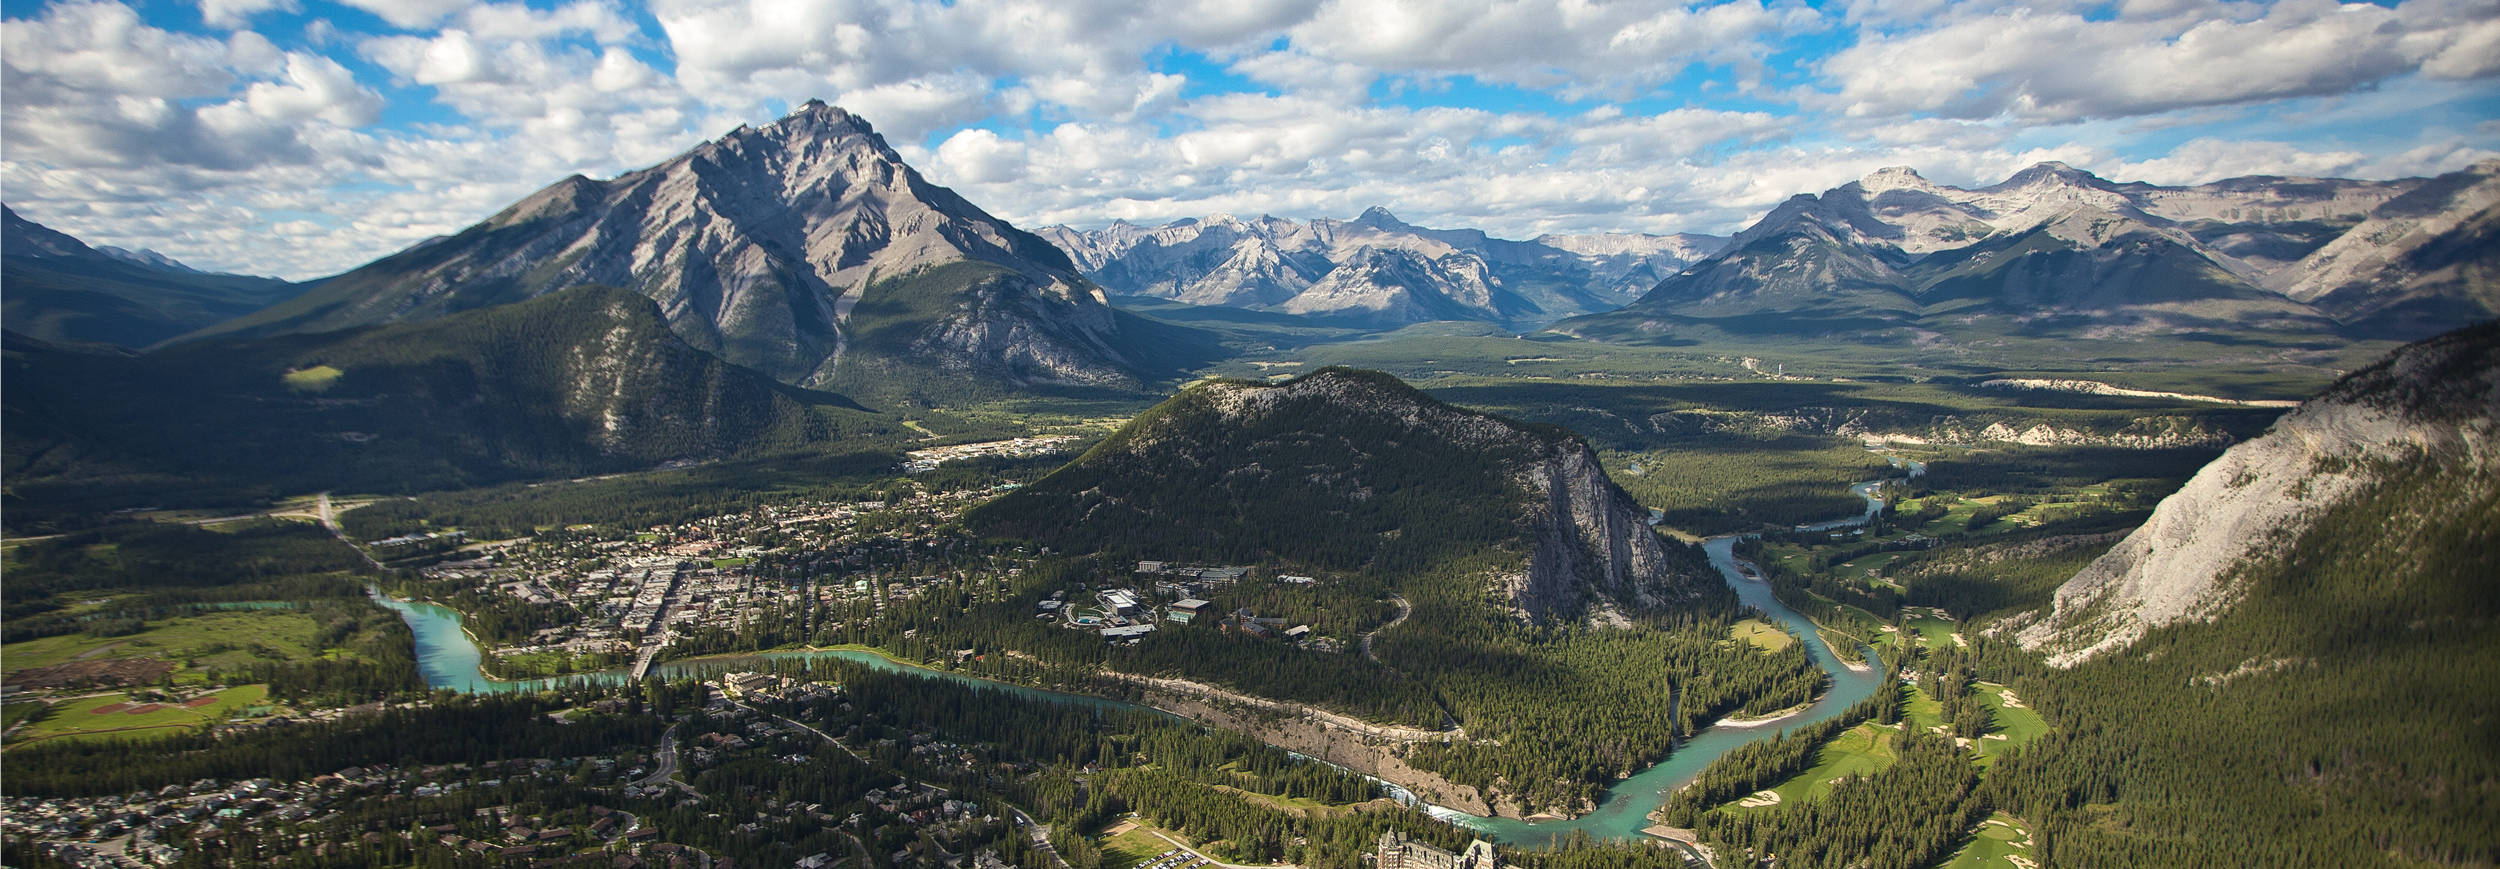 View of Banff from the top of a mountain